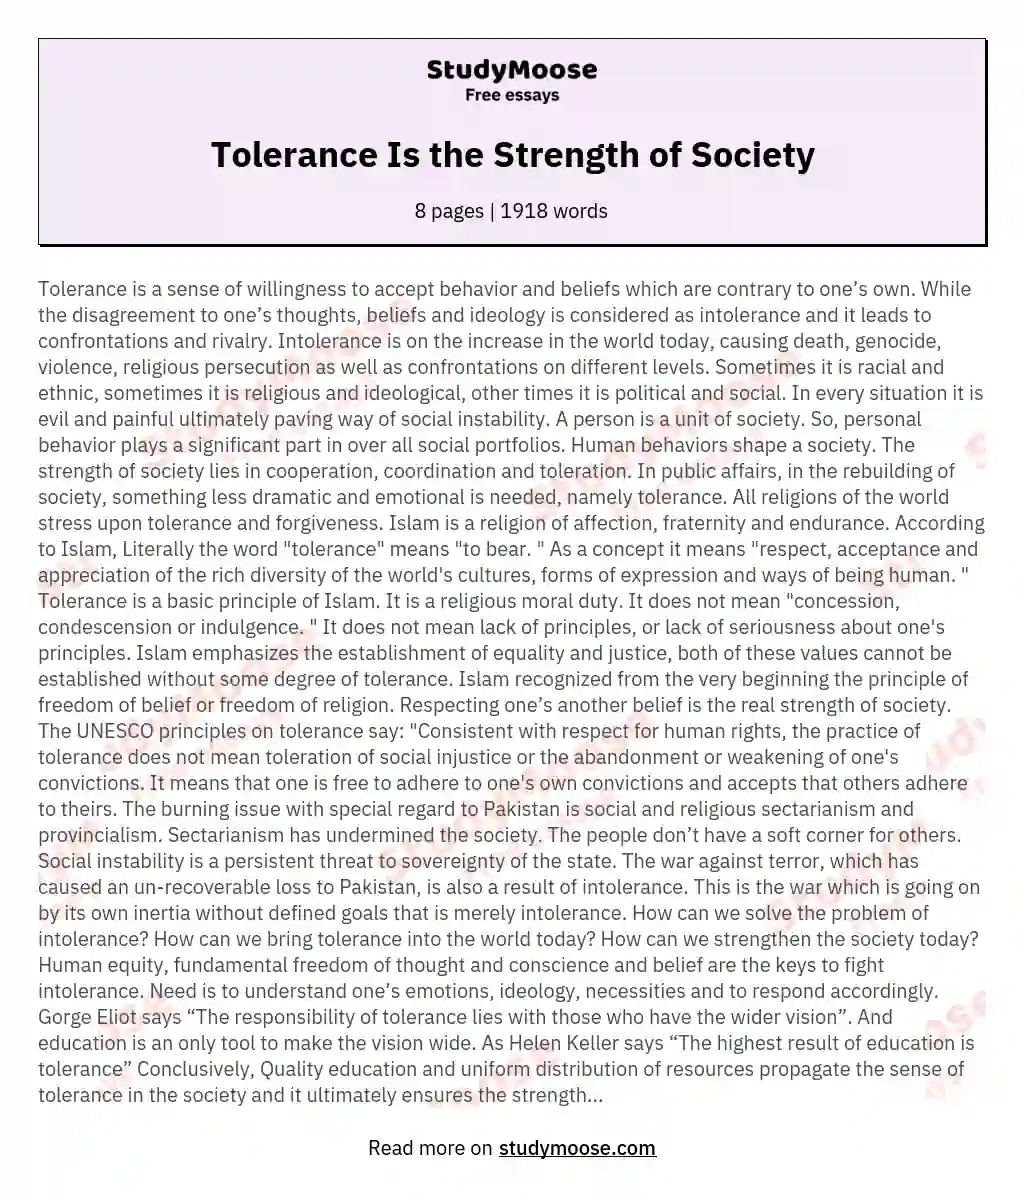 Tolerance Is the Strength of Society essay